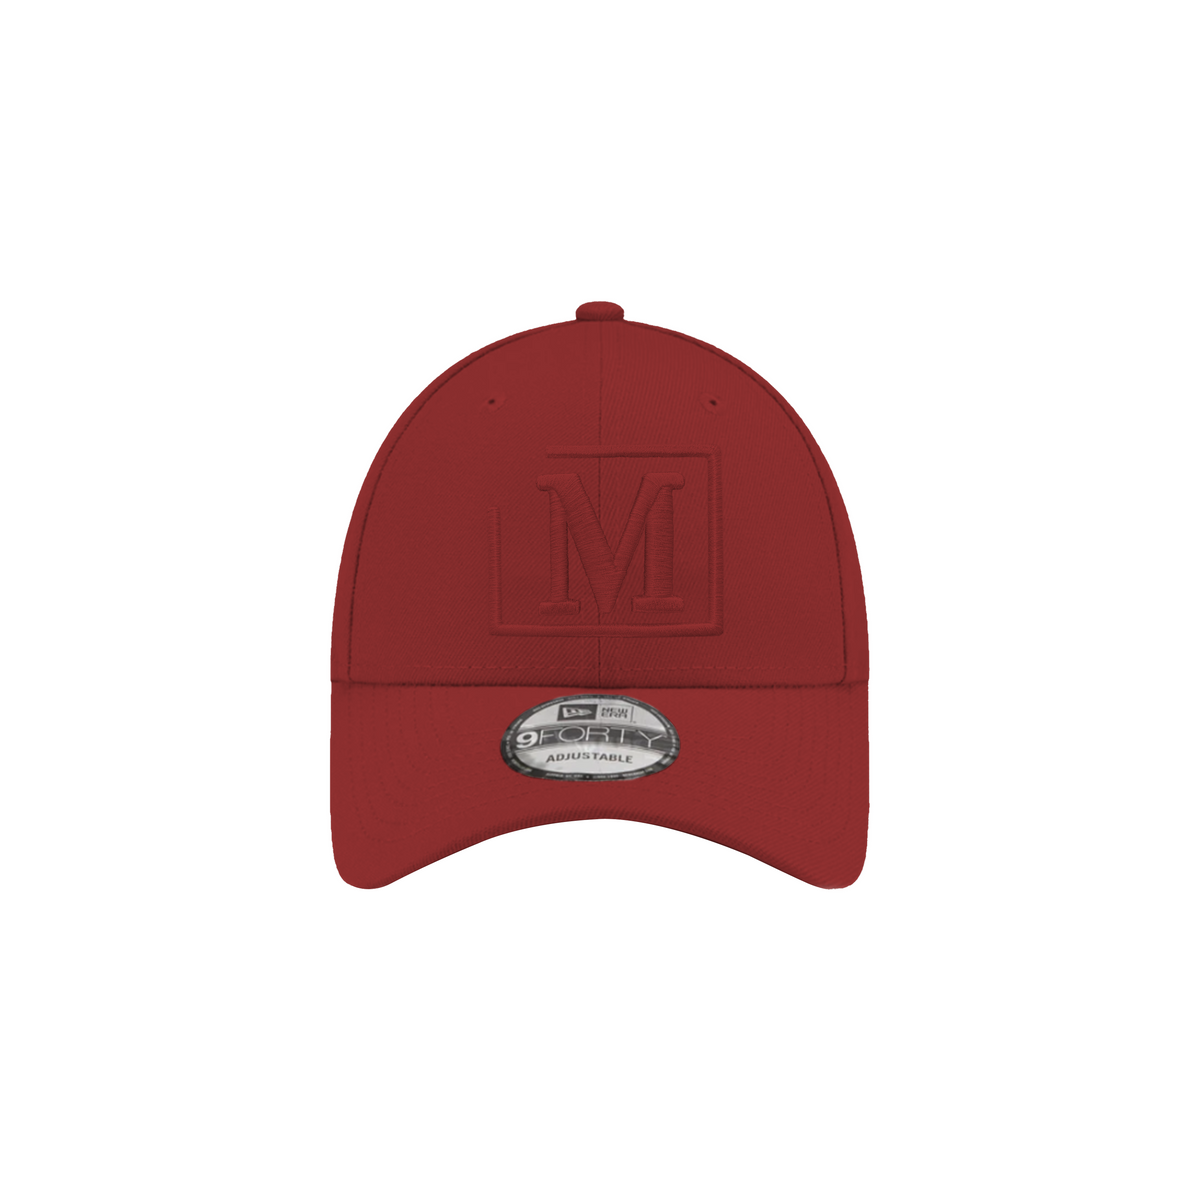 MDB Brand x New Era 9Forty Stretch Snap Embroidered Cap - Red